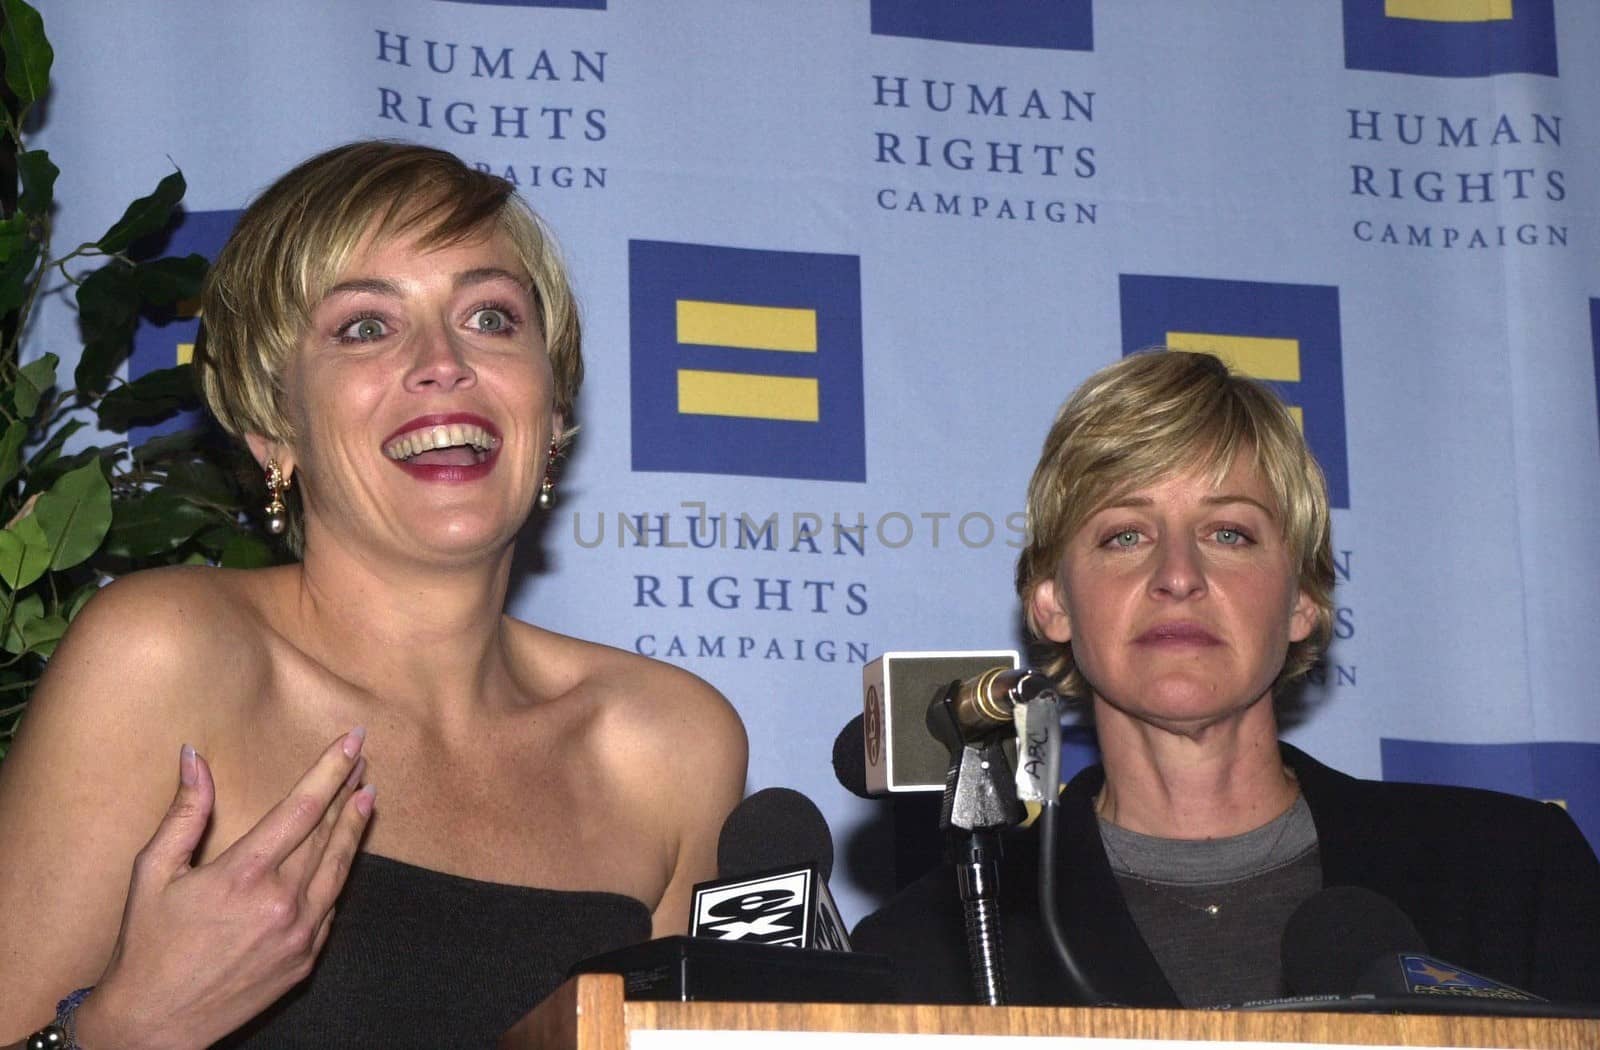 Sharon Stone and Ellen Degeneres at the Human Rights Campaign Gala, 02-19-00